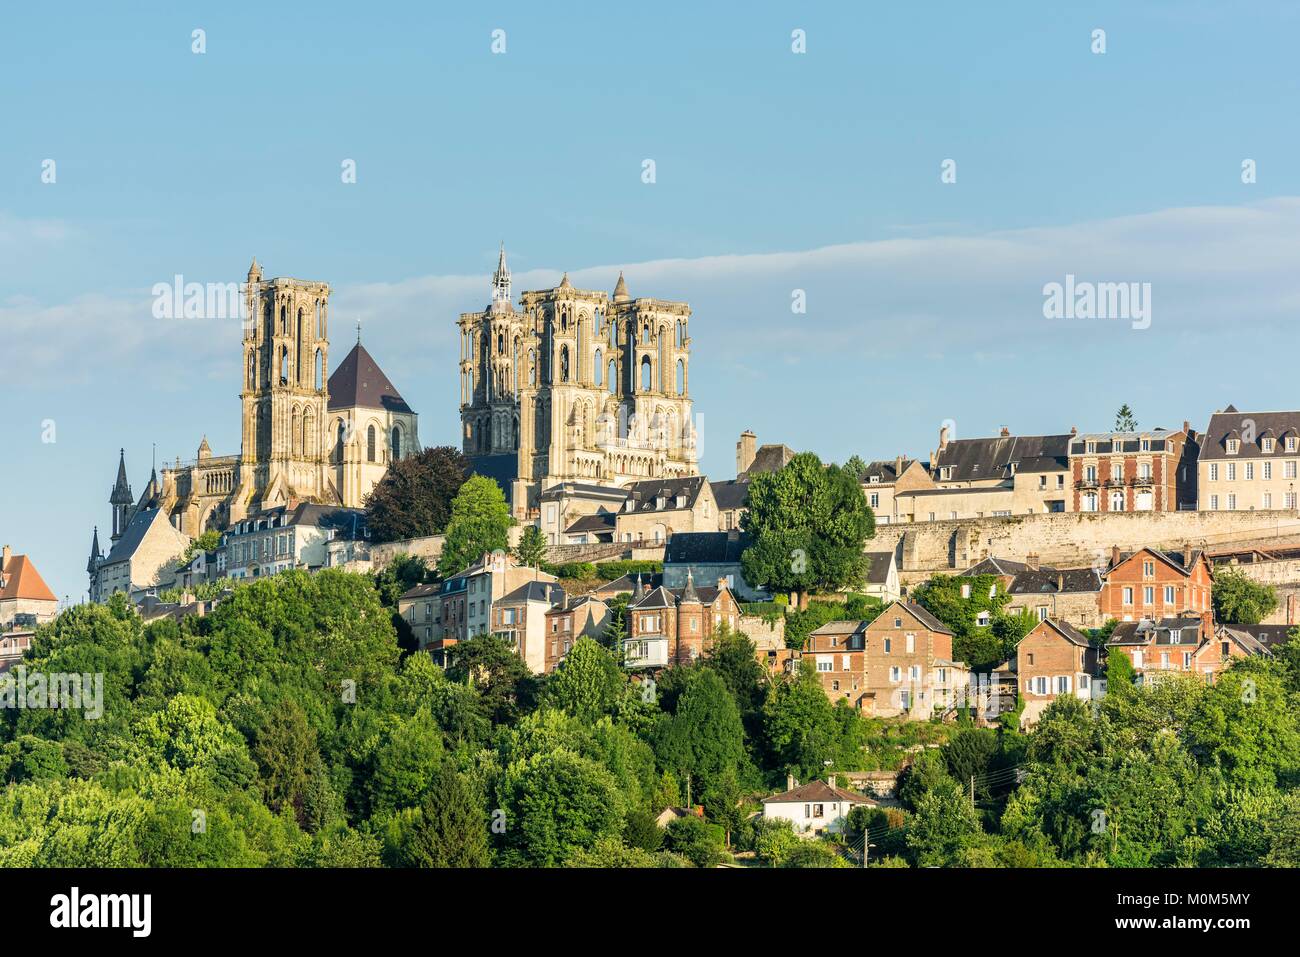 France,Aisne,Laon,the Upper town,Notre-Dame de Laon cathedral,Gothic architecture Stock Photo